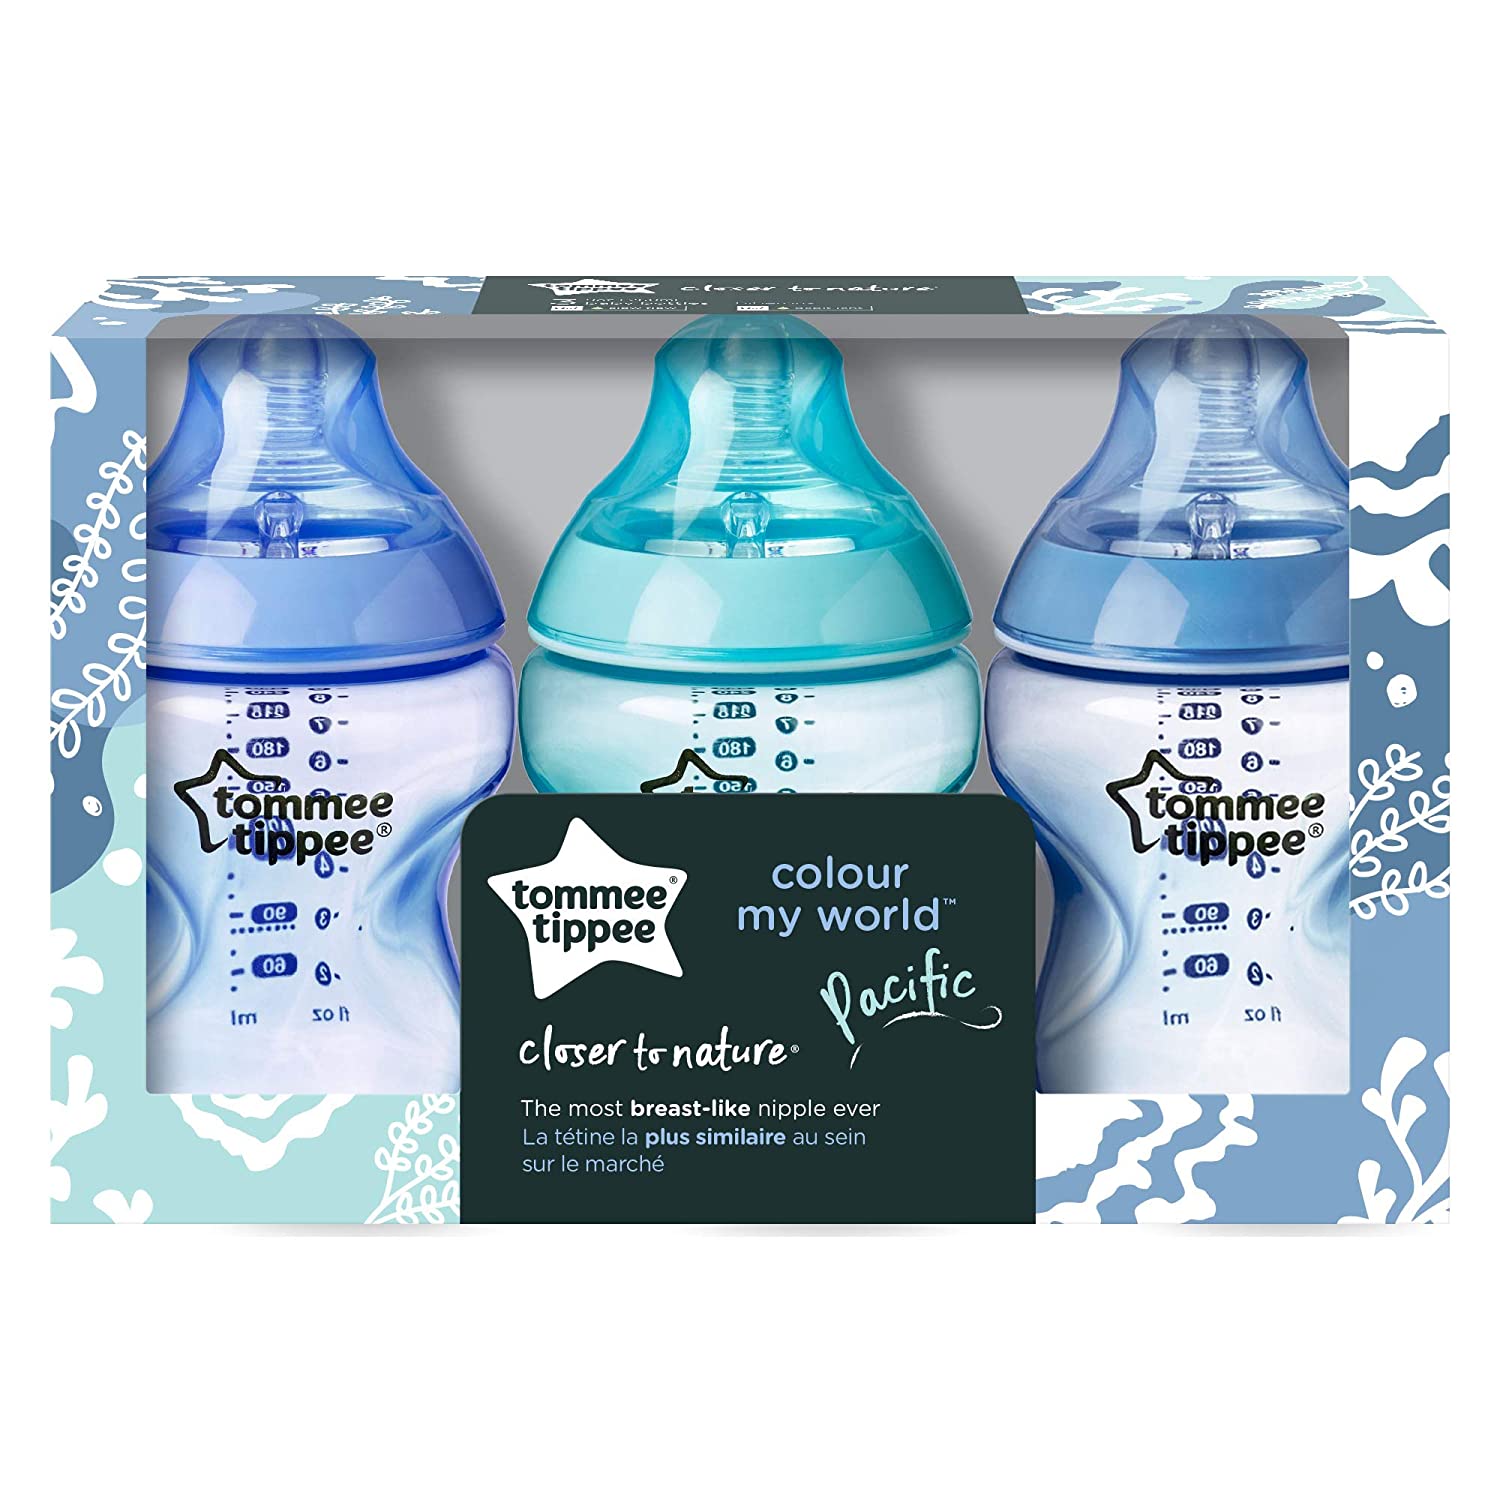 Tommee Tippee Closer To Nature 9oz - 3pk - Blue